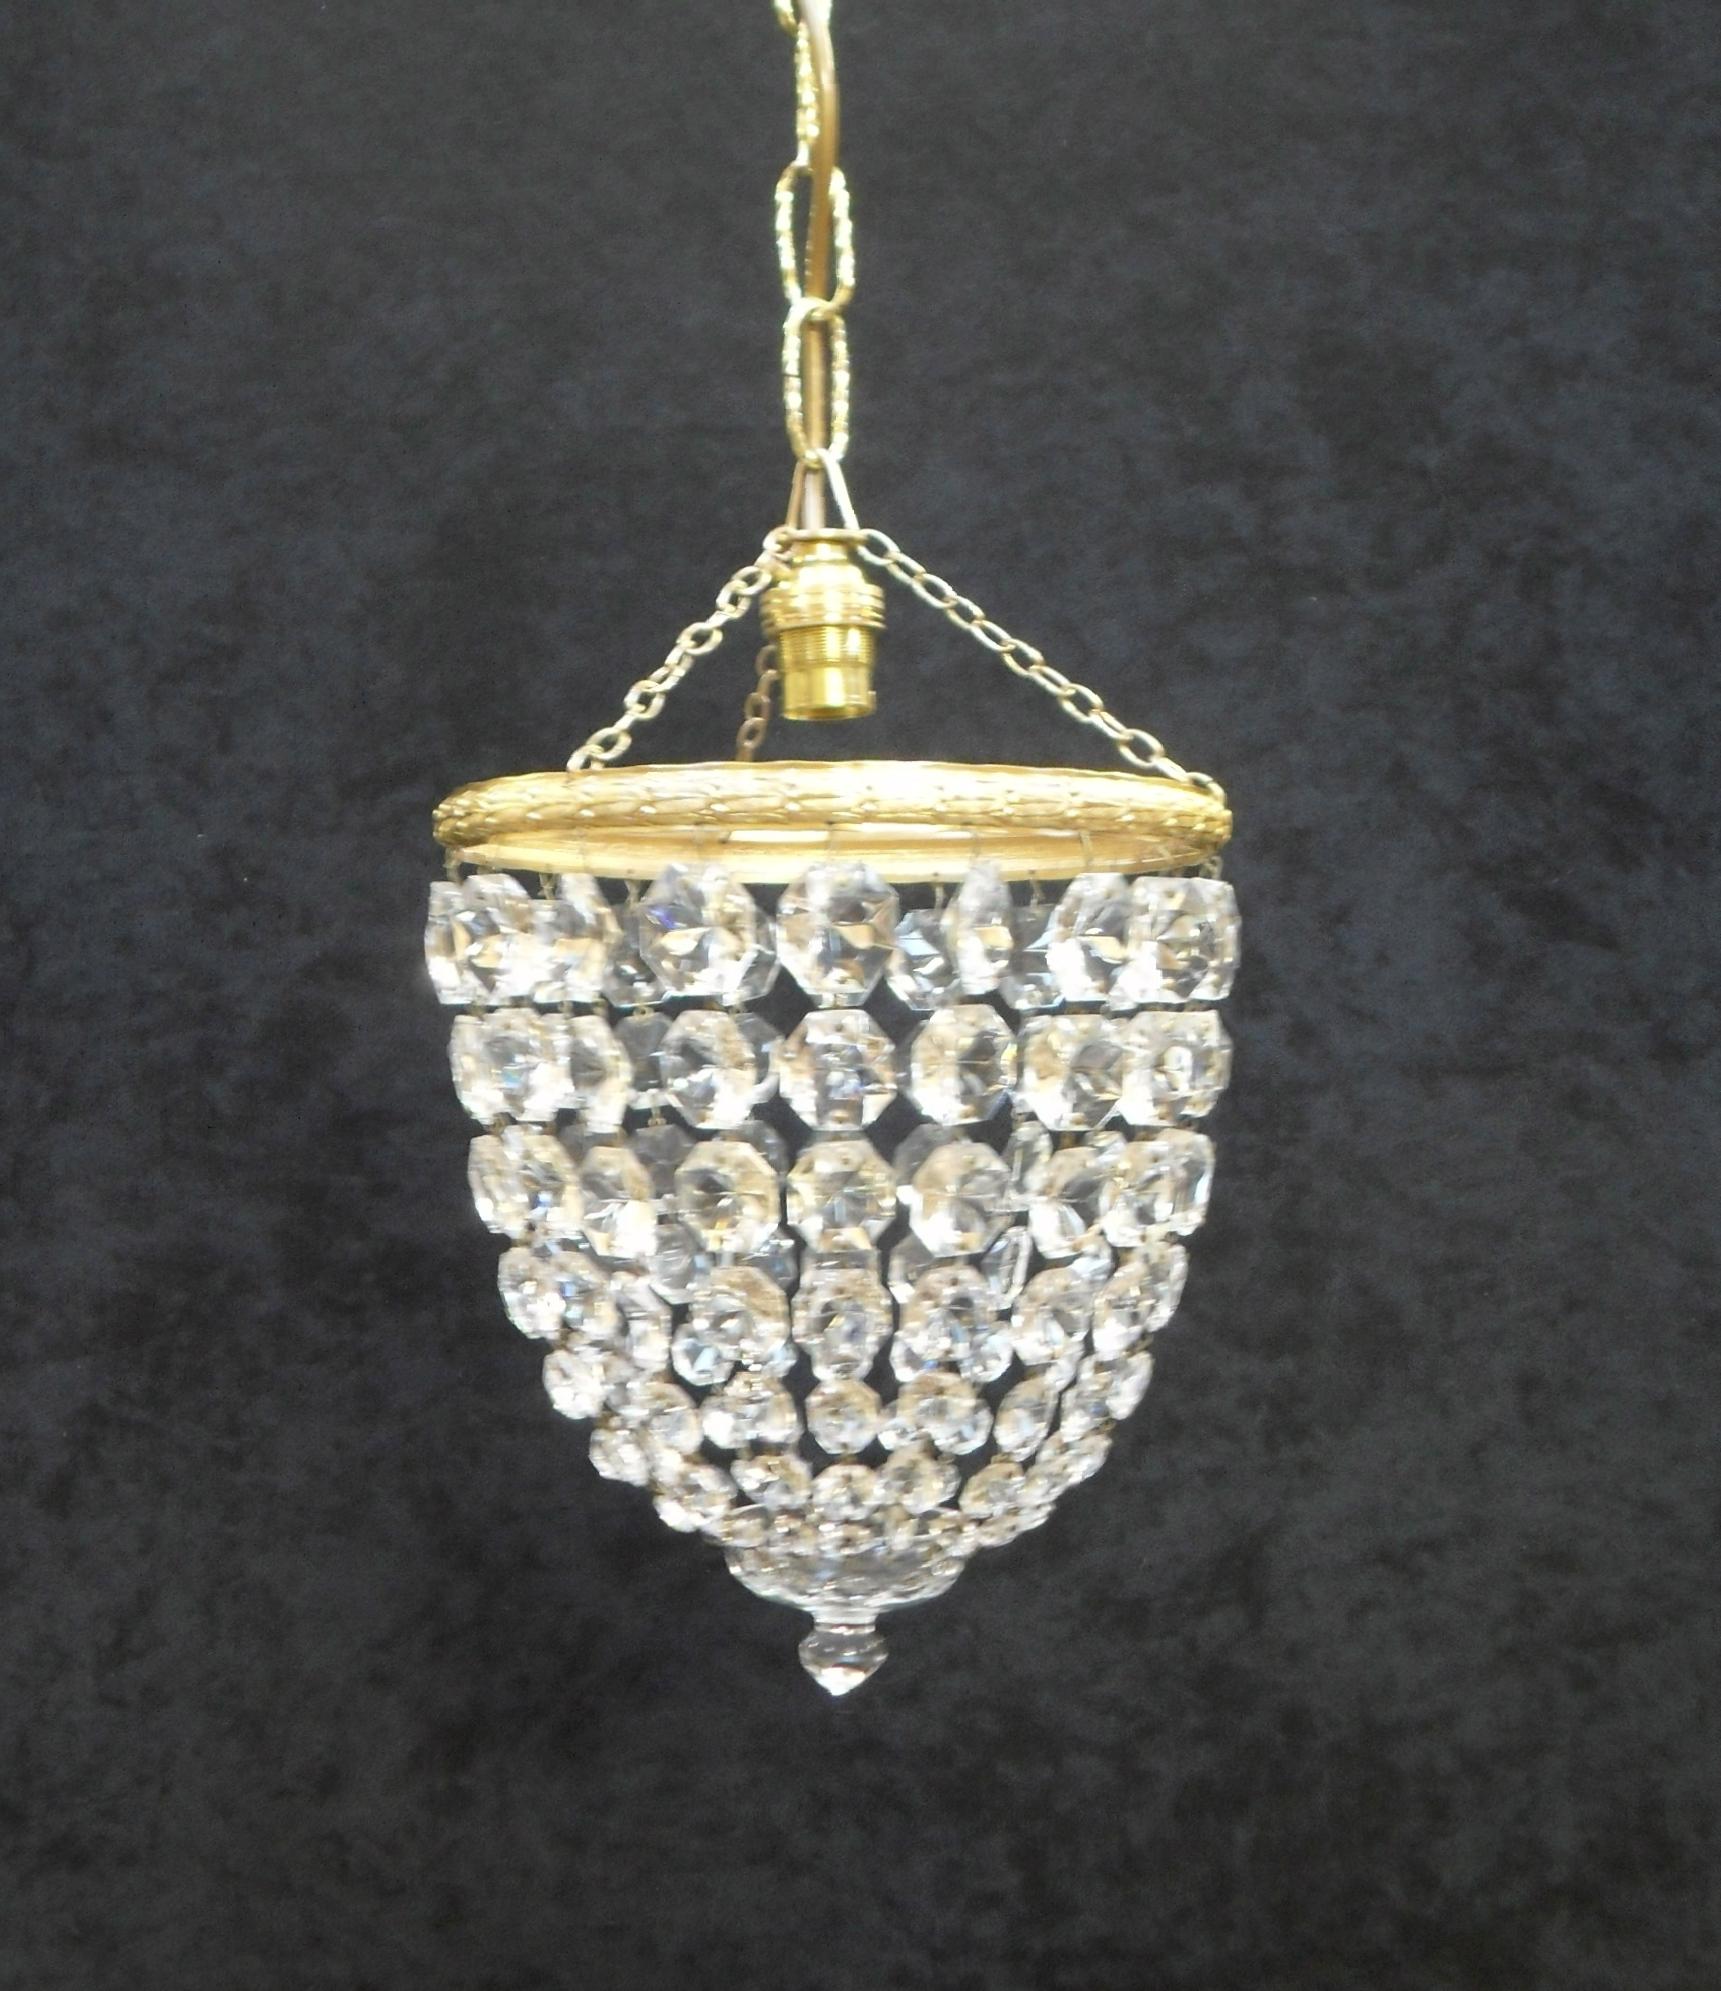 A very good quality pair of Italian Art Deco basket chandeliers with graduating diamond shaped cut crystal glass finished with a glass finial to the bottom with decorative brass frames on an adjustable 10 inch chain. The brass has been cleaned and